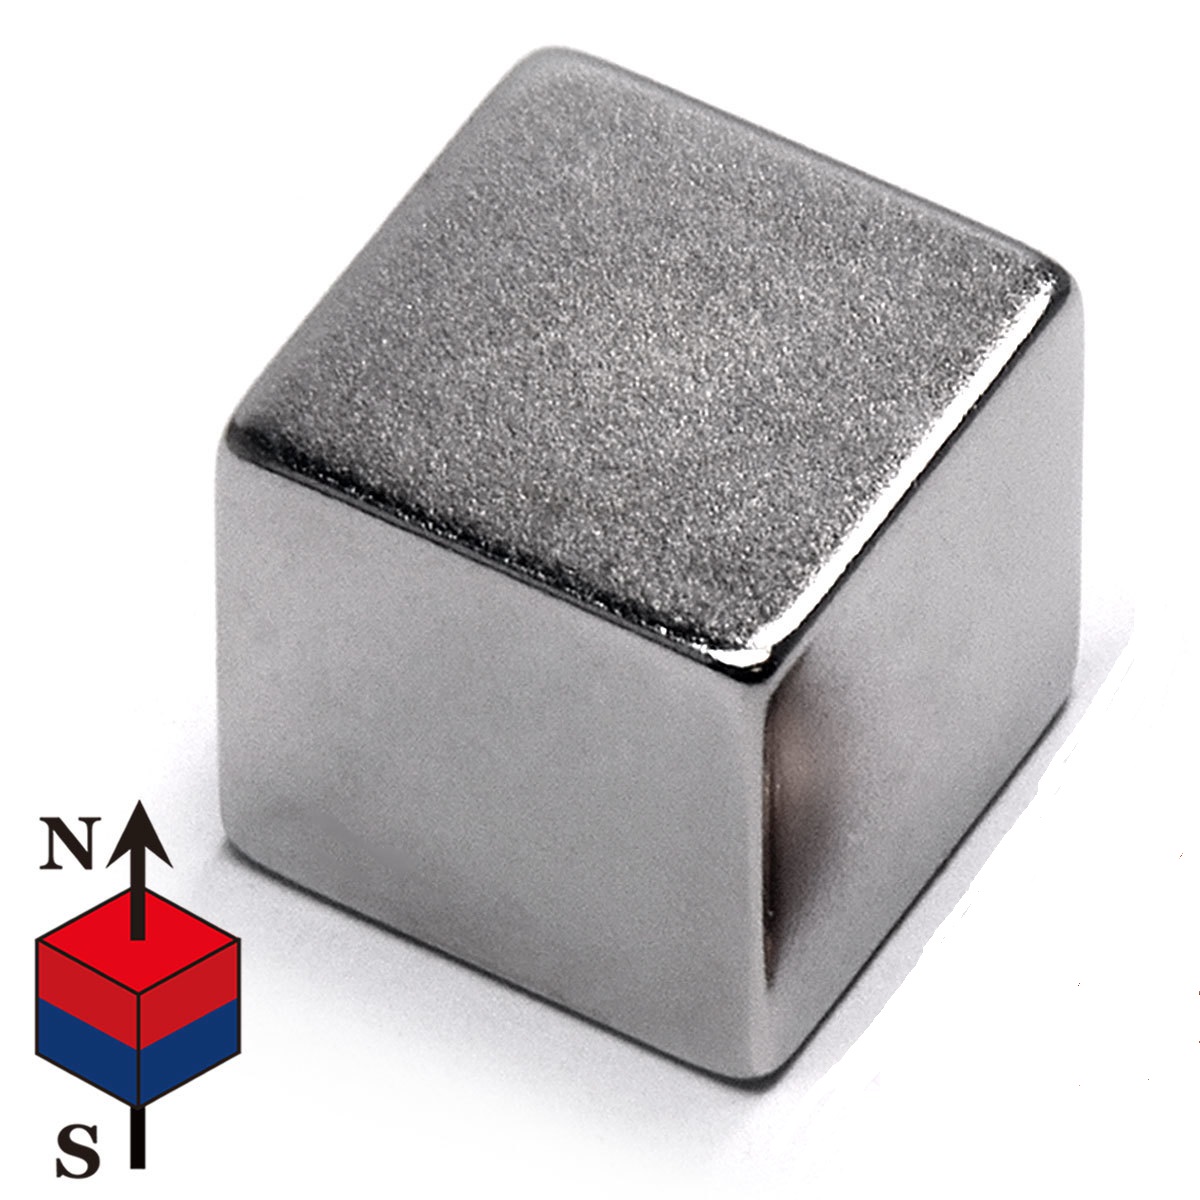 Neodymium Cube magnets, Magnetic Cubes Neodymium Rare Earth Cube magnets for Sale Magnet Super strong